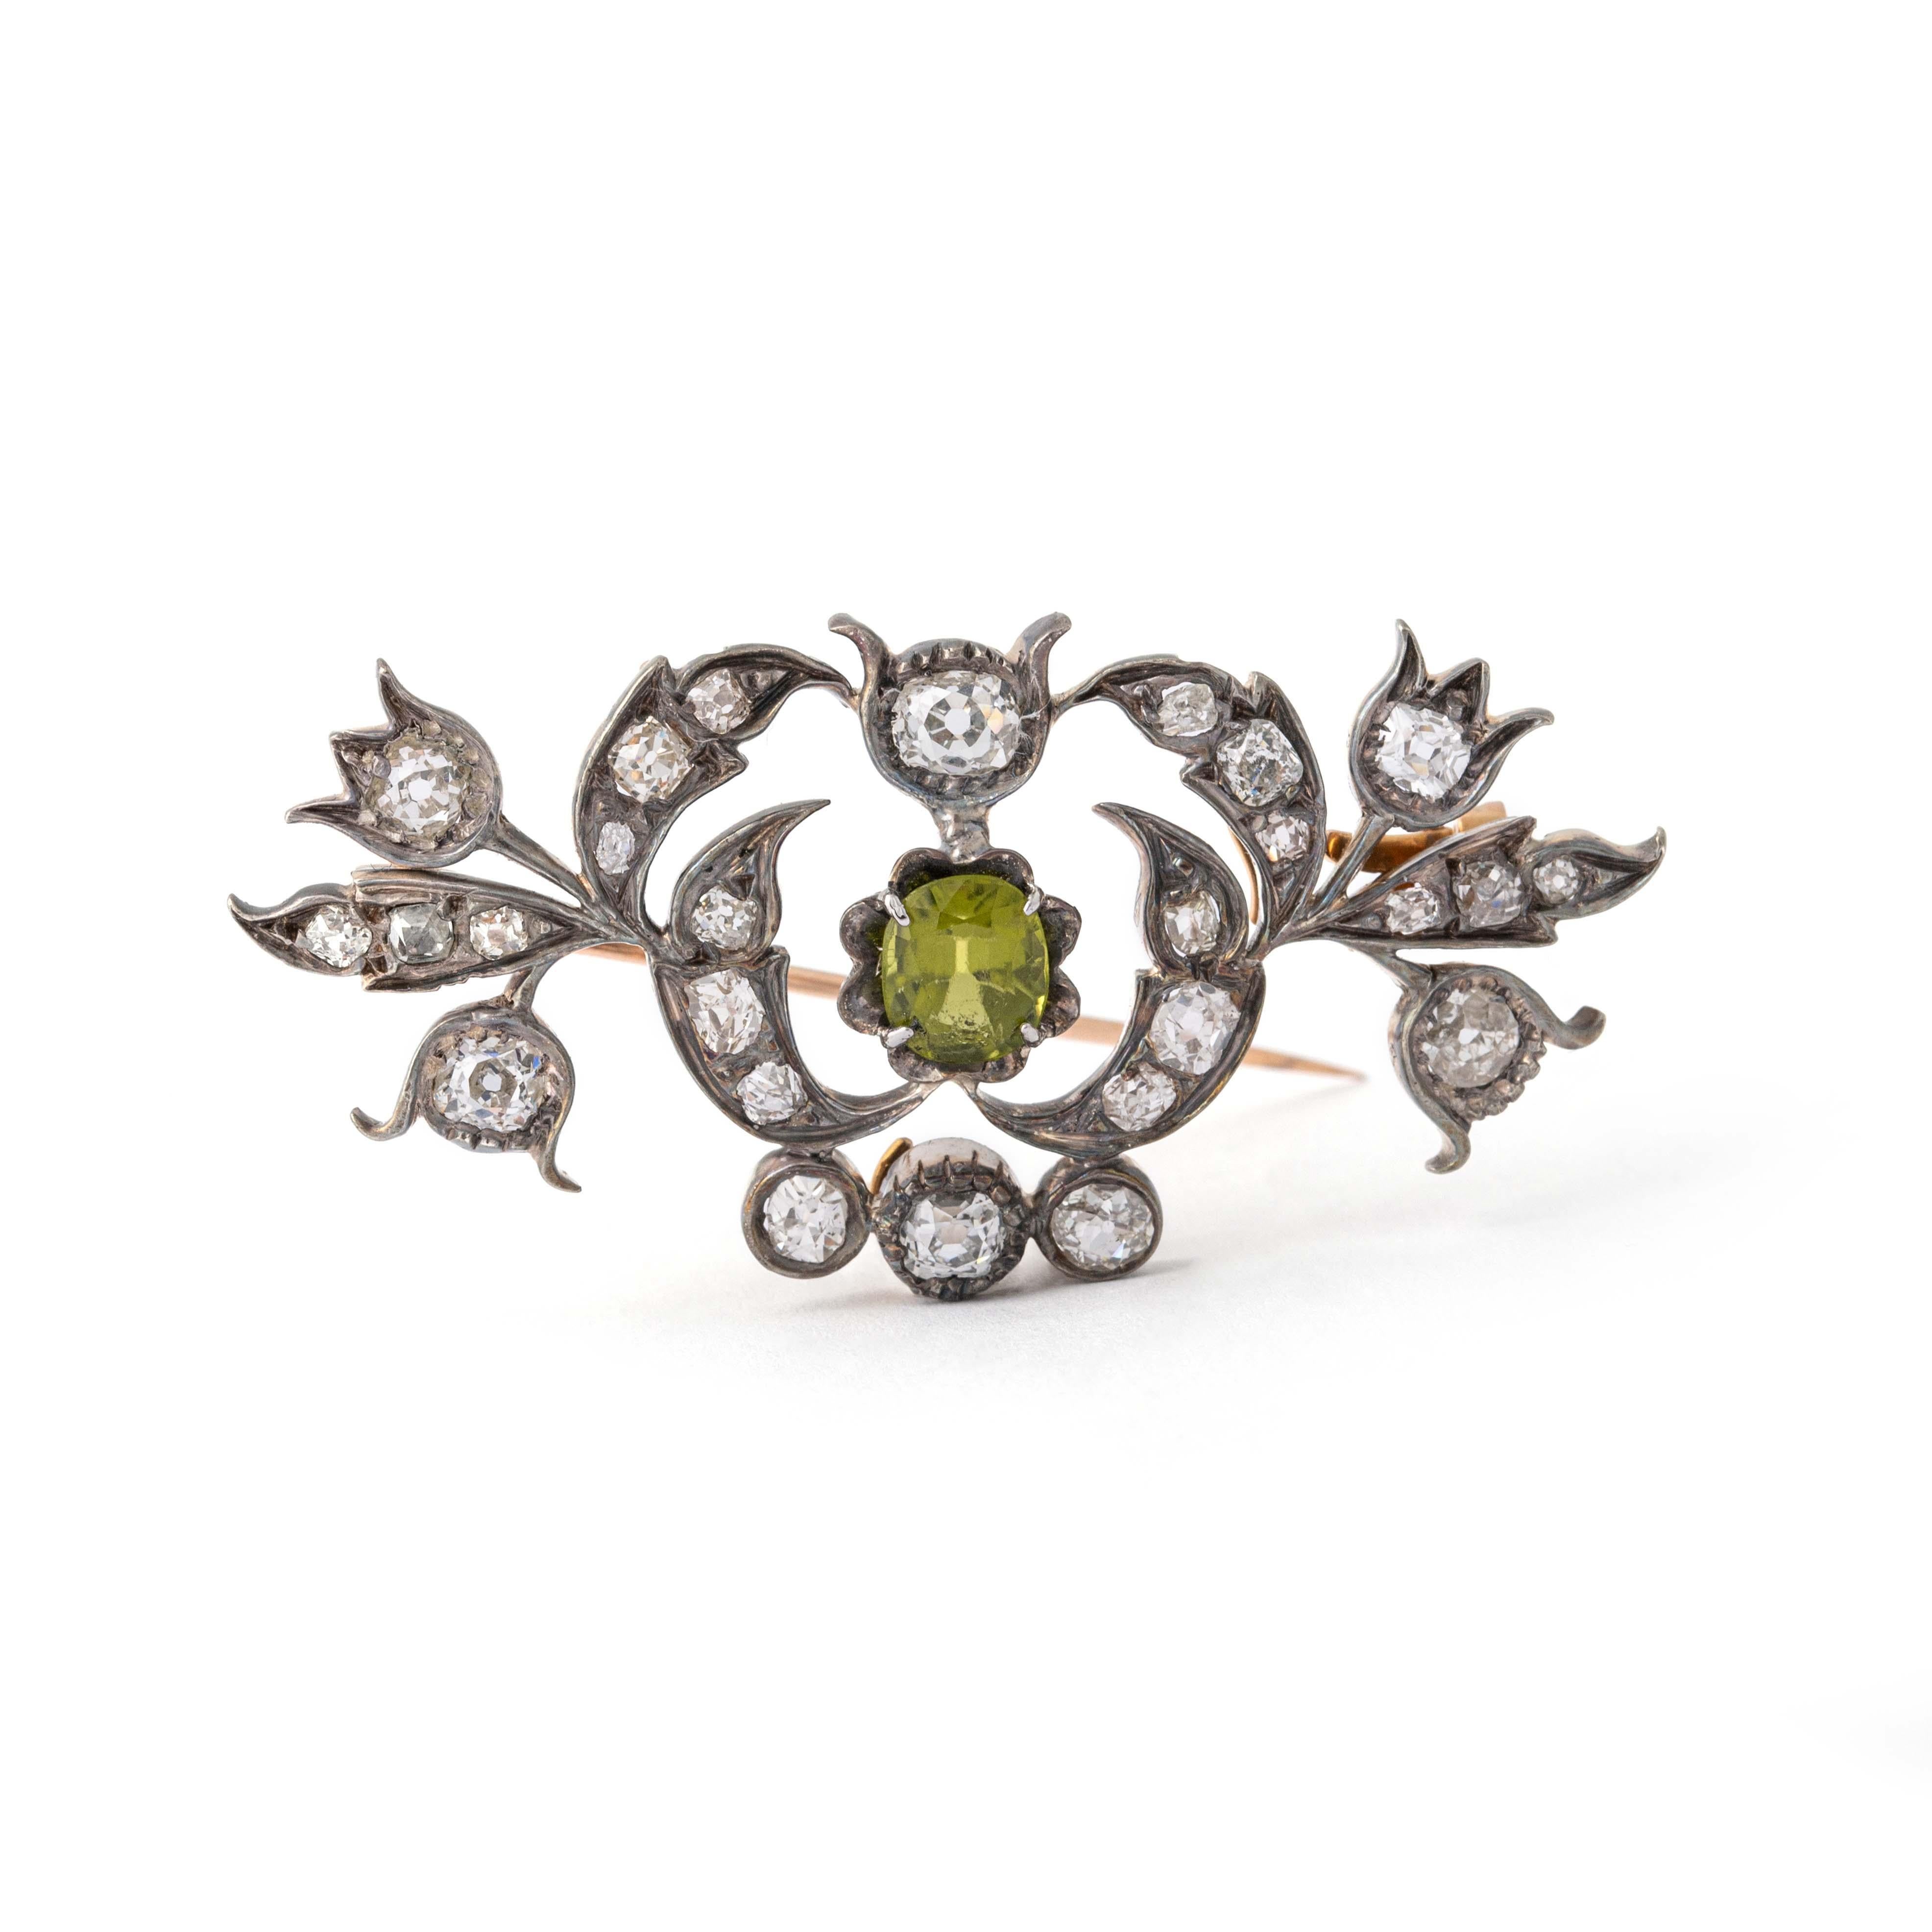 Antique Diamond and Peridot Brooch Pendant Late 19th Century For Sale 2